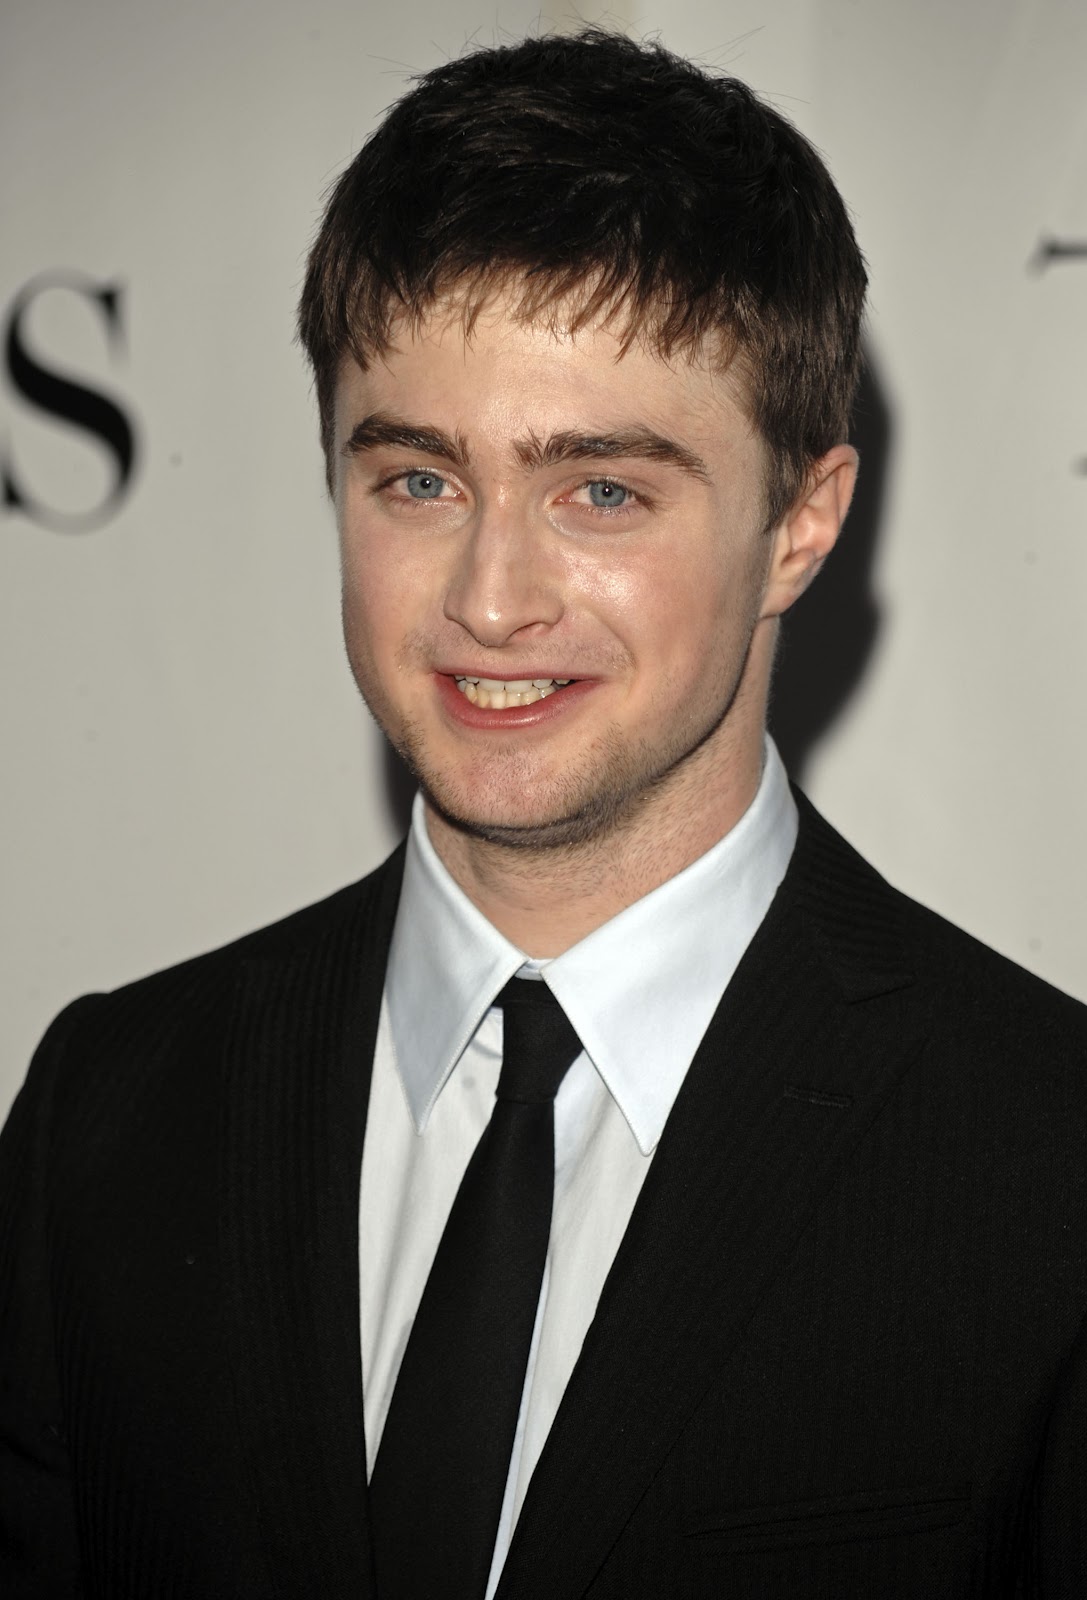 Daniel Radcliffe | HD Wallpapers (High Definition) | Free ...